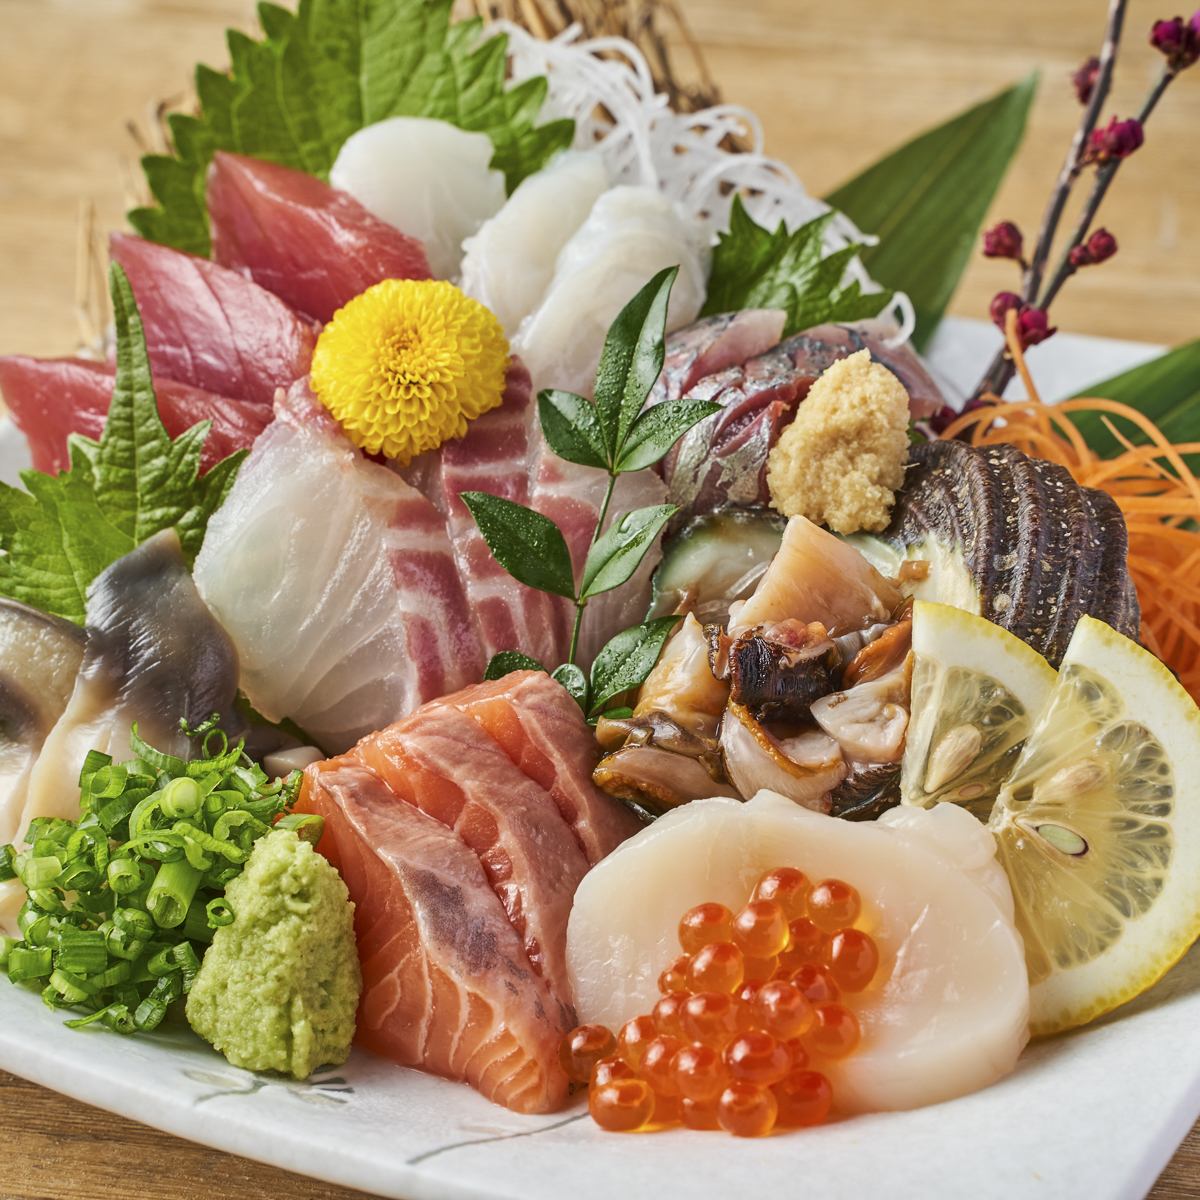 We have a large selection of freshly caught fish and special items that go well with alcohol ◎